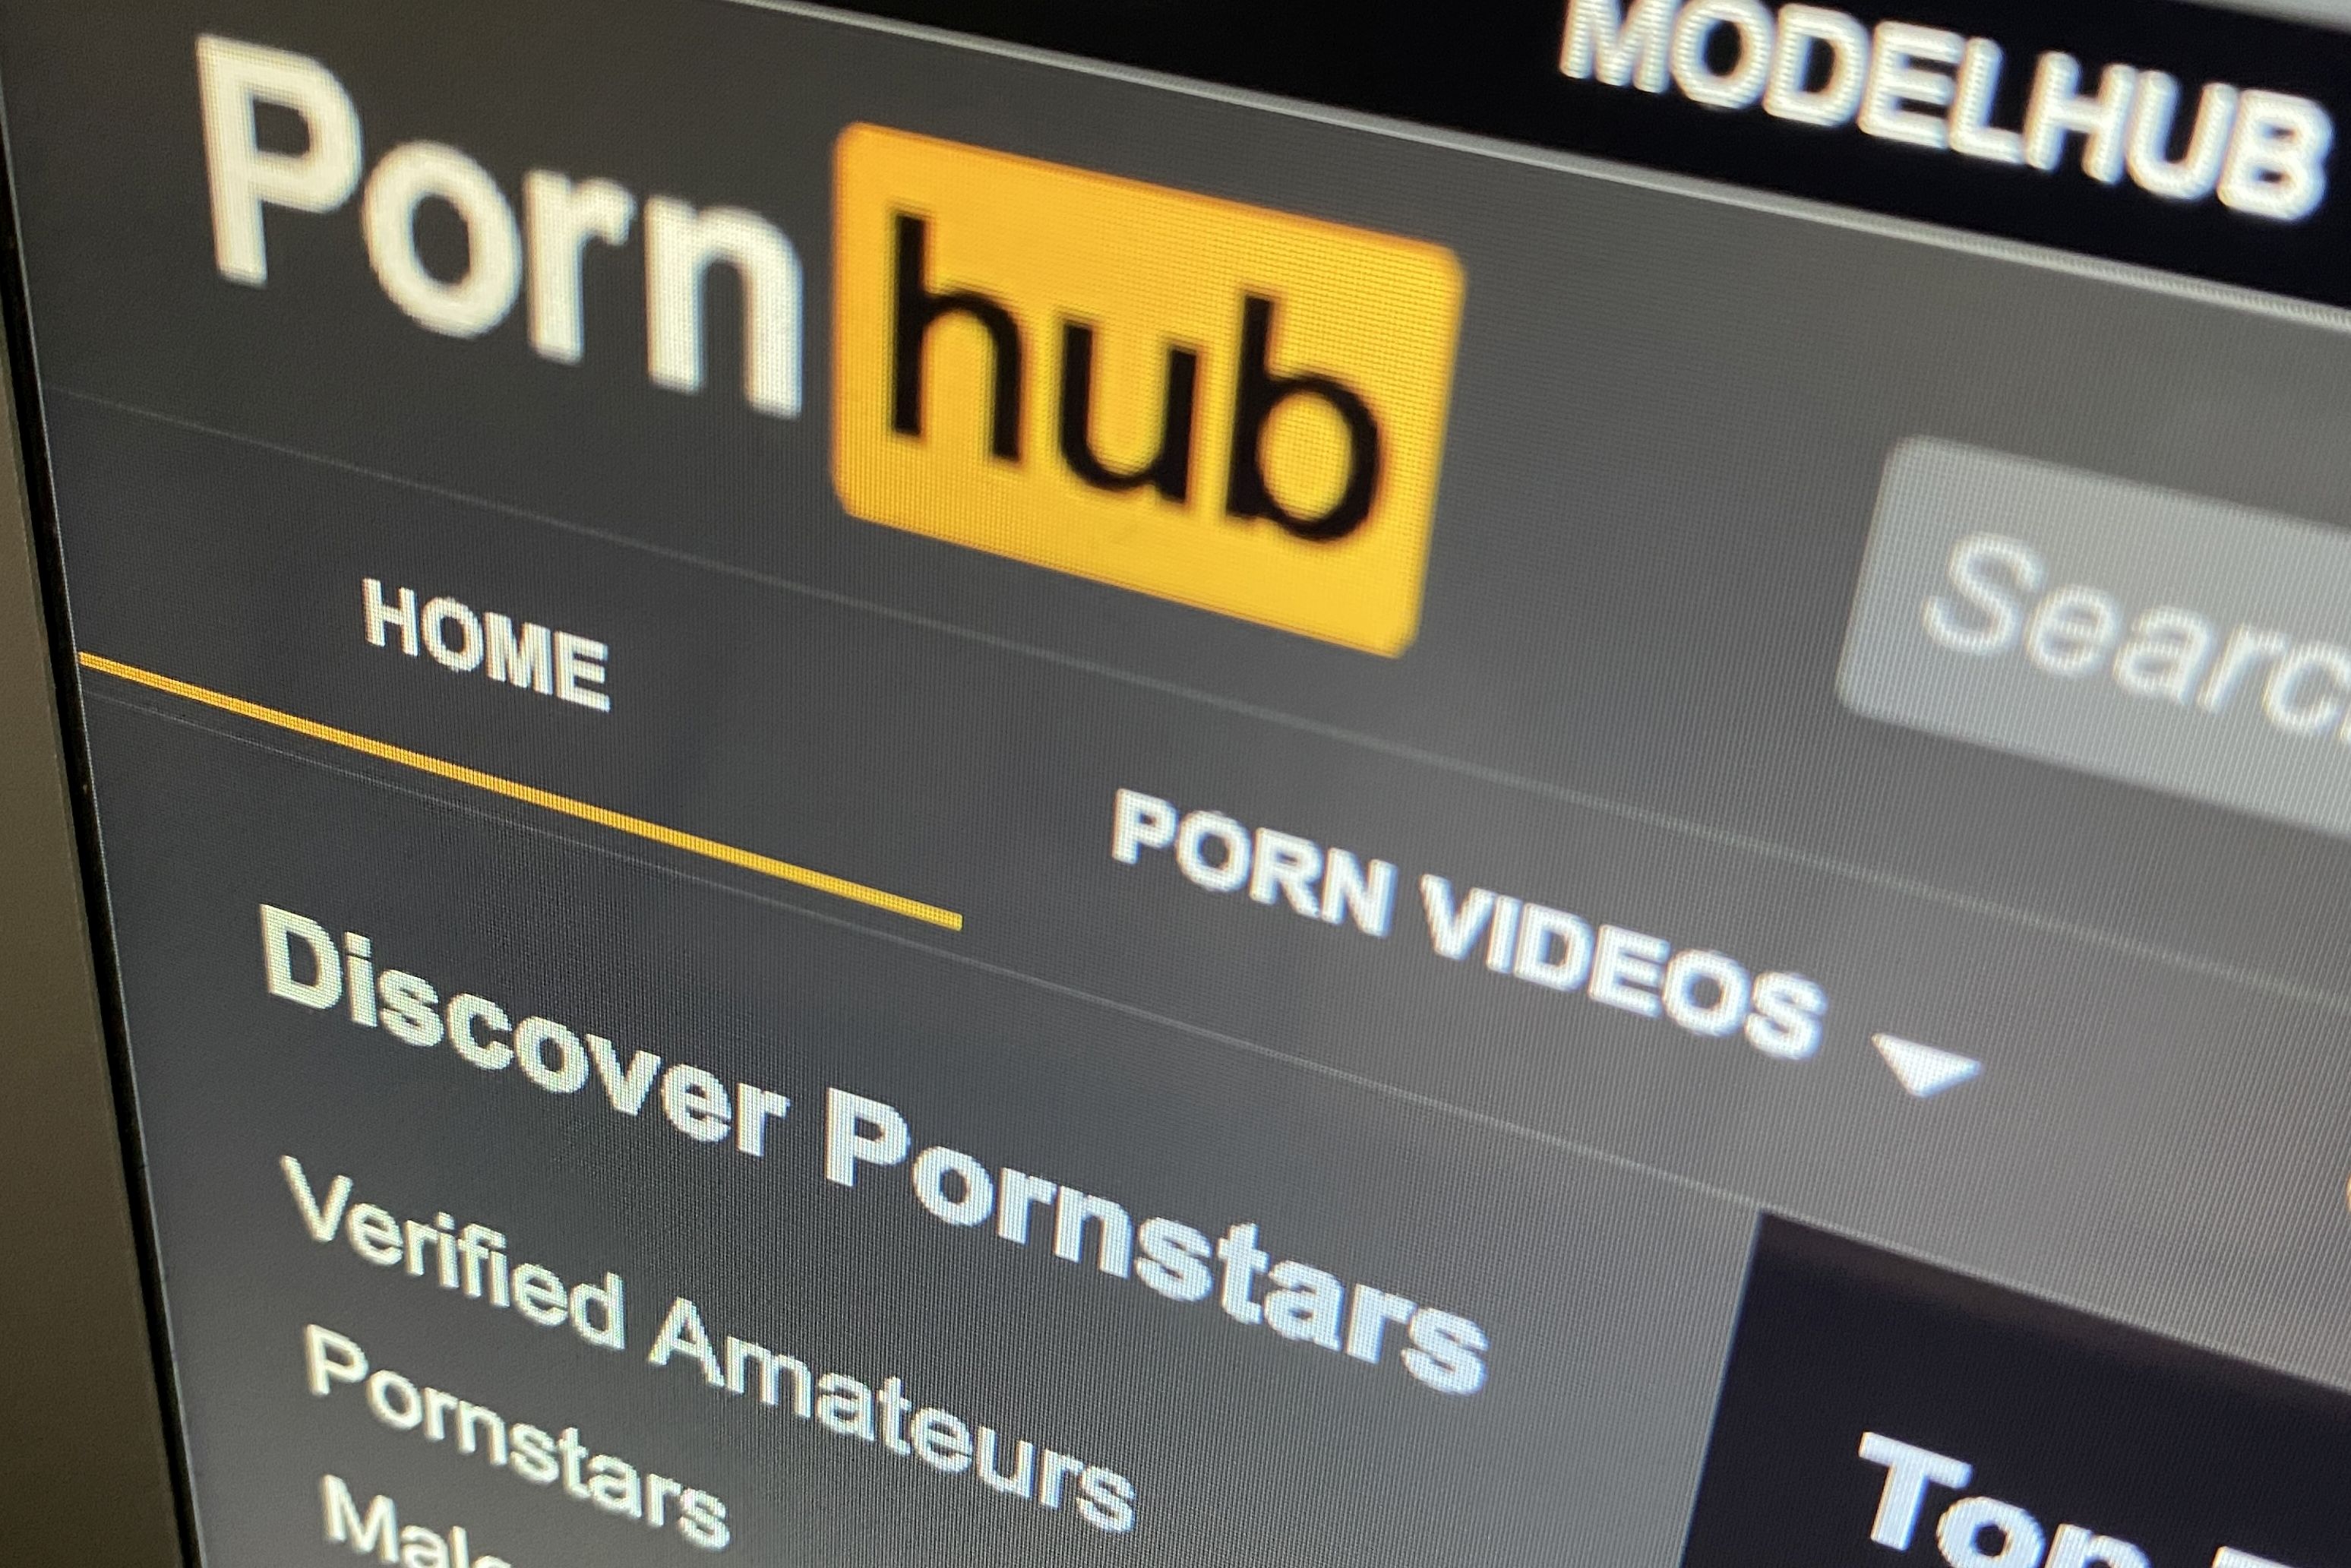 MP Calls for Law to Fight Online Sexual Exploitation Amid Pornhub